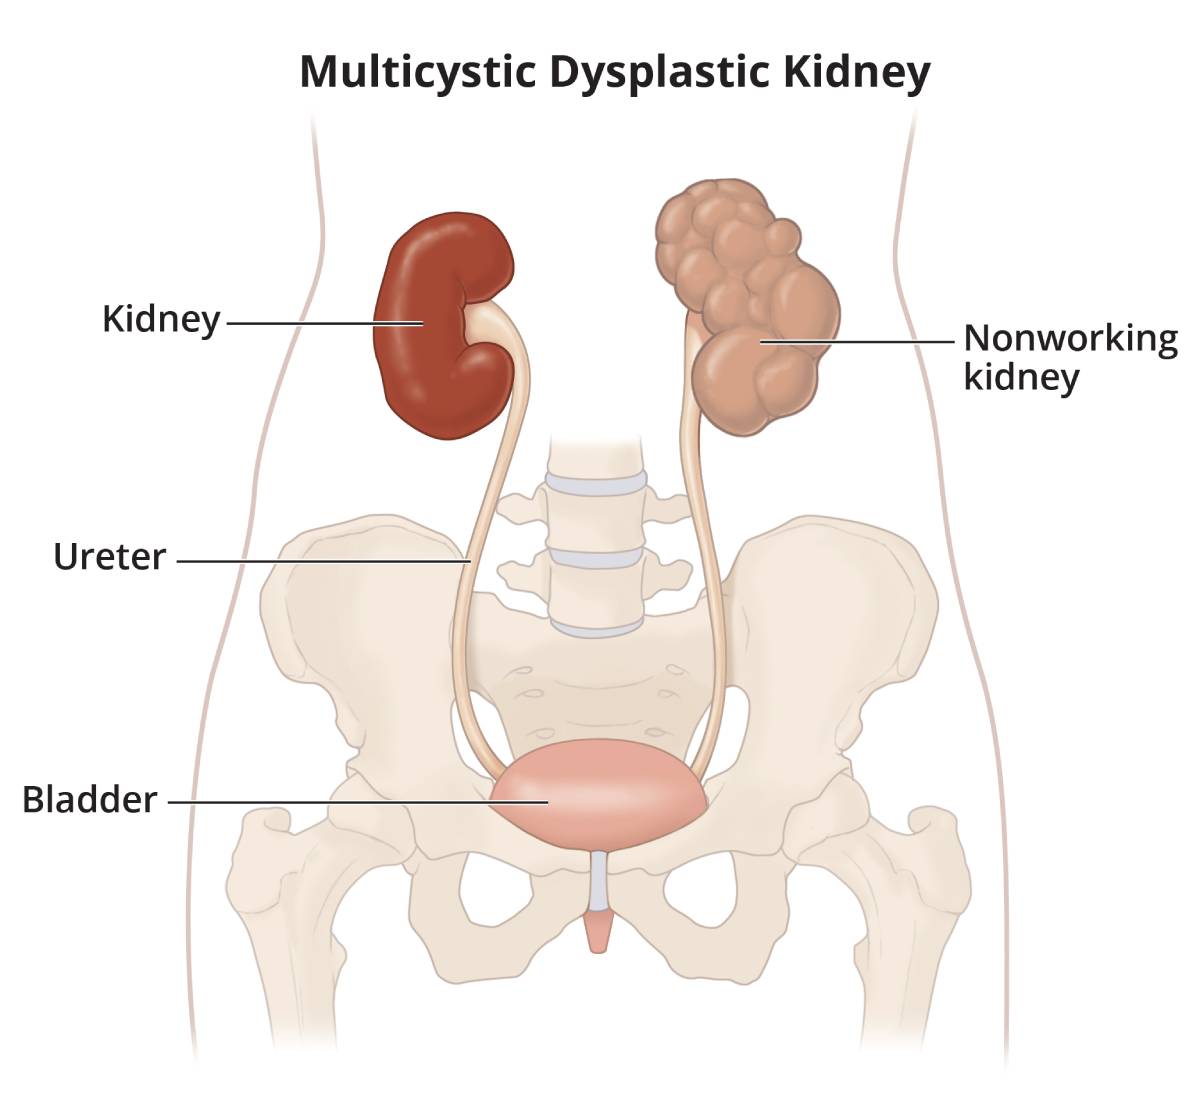 A non-working multicystic dysplastic kidney set in the outline of the body along with a working kidney, ureters, and bladder.